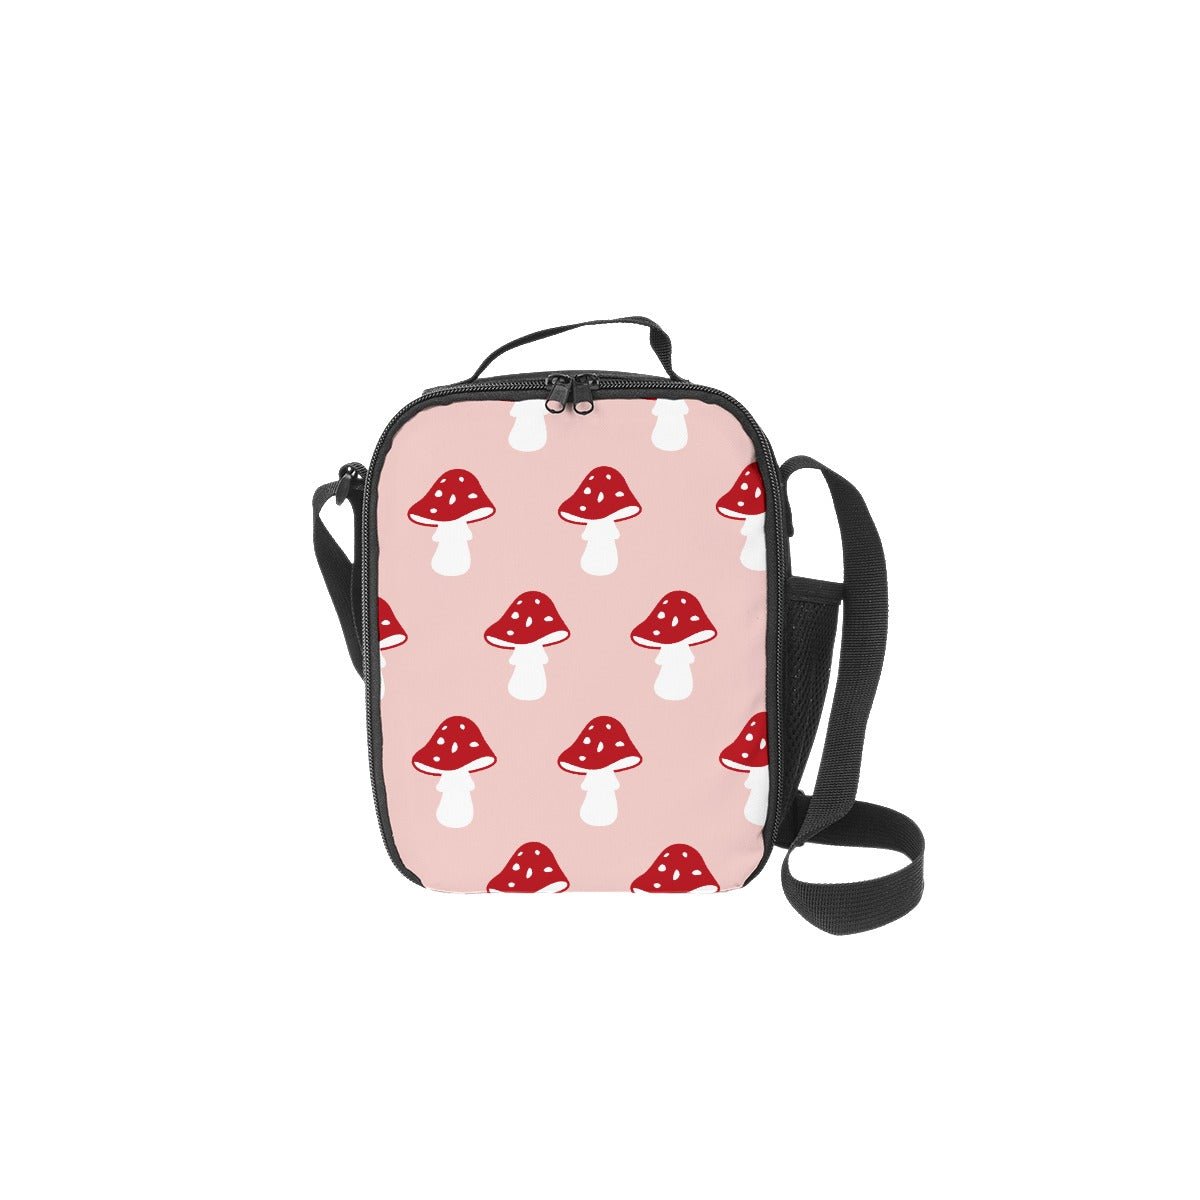 MUSHROOMS LUNCH BAG - dragqueenmerch